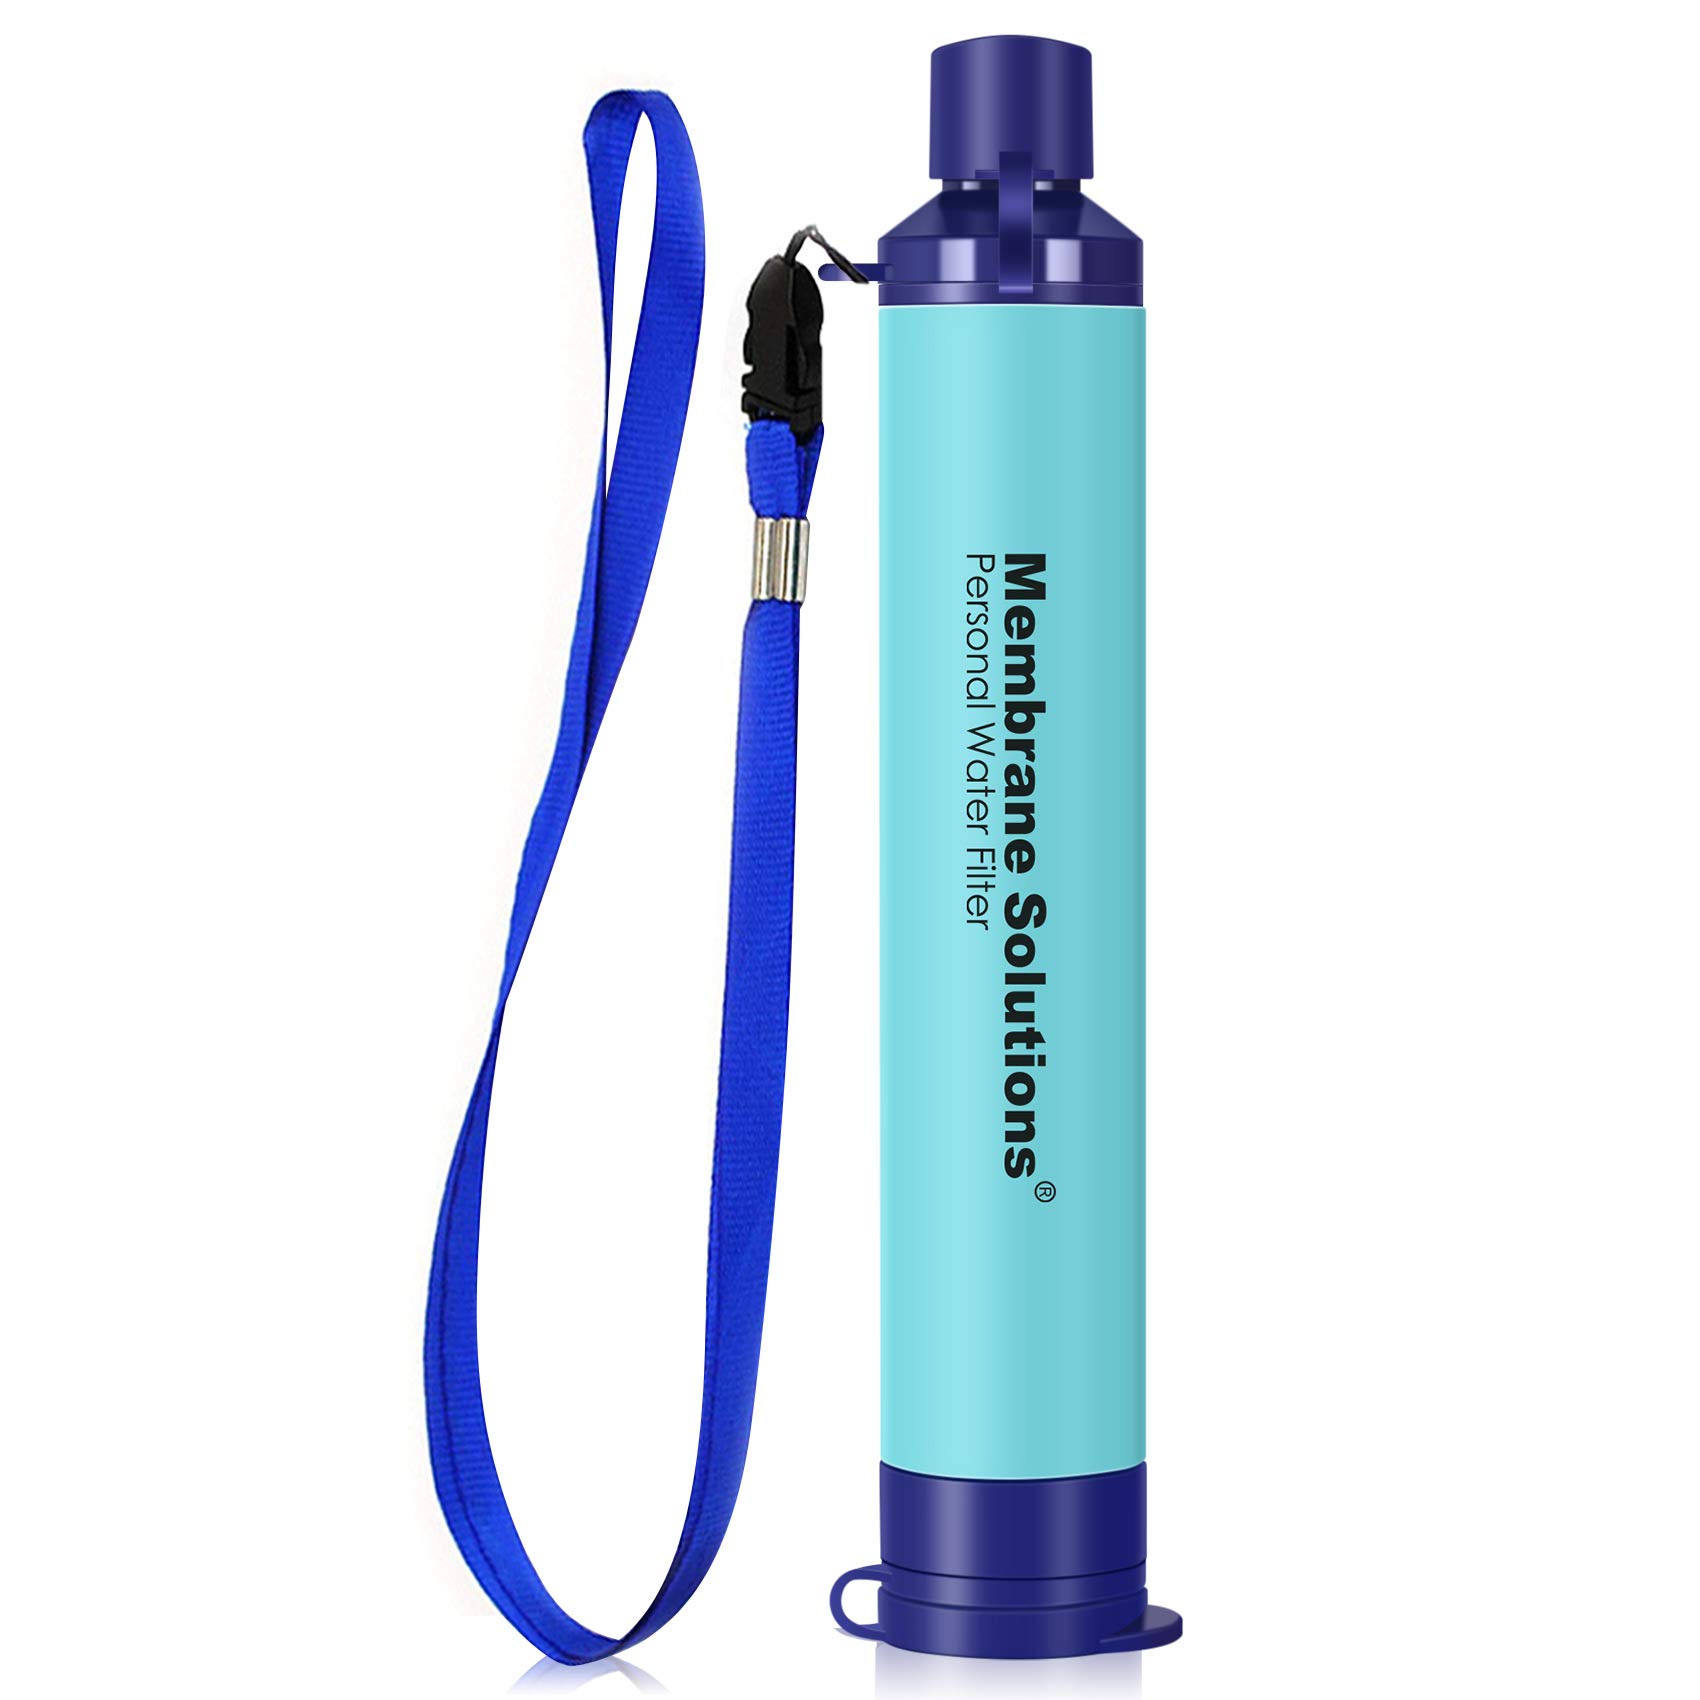 Membrane Solutions Straw Water Filter, Survival Filtration Portable Gear $6.49